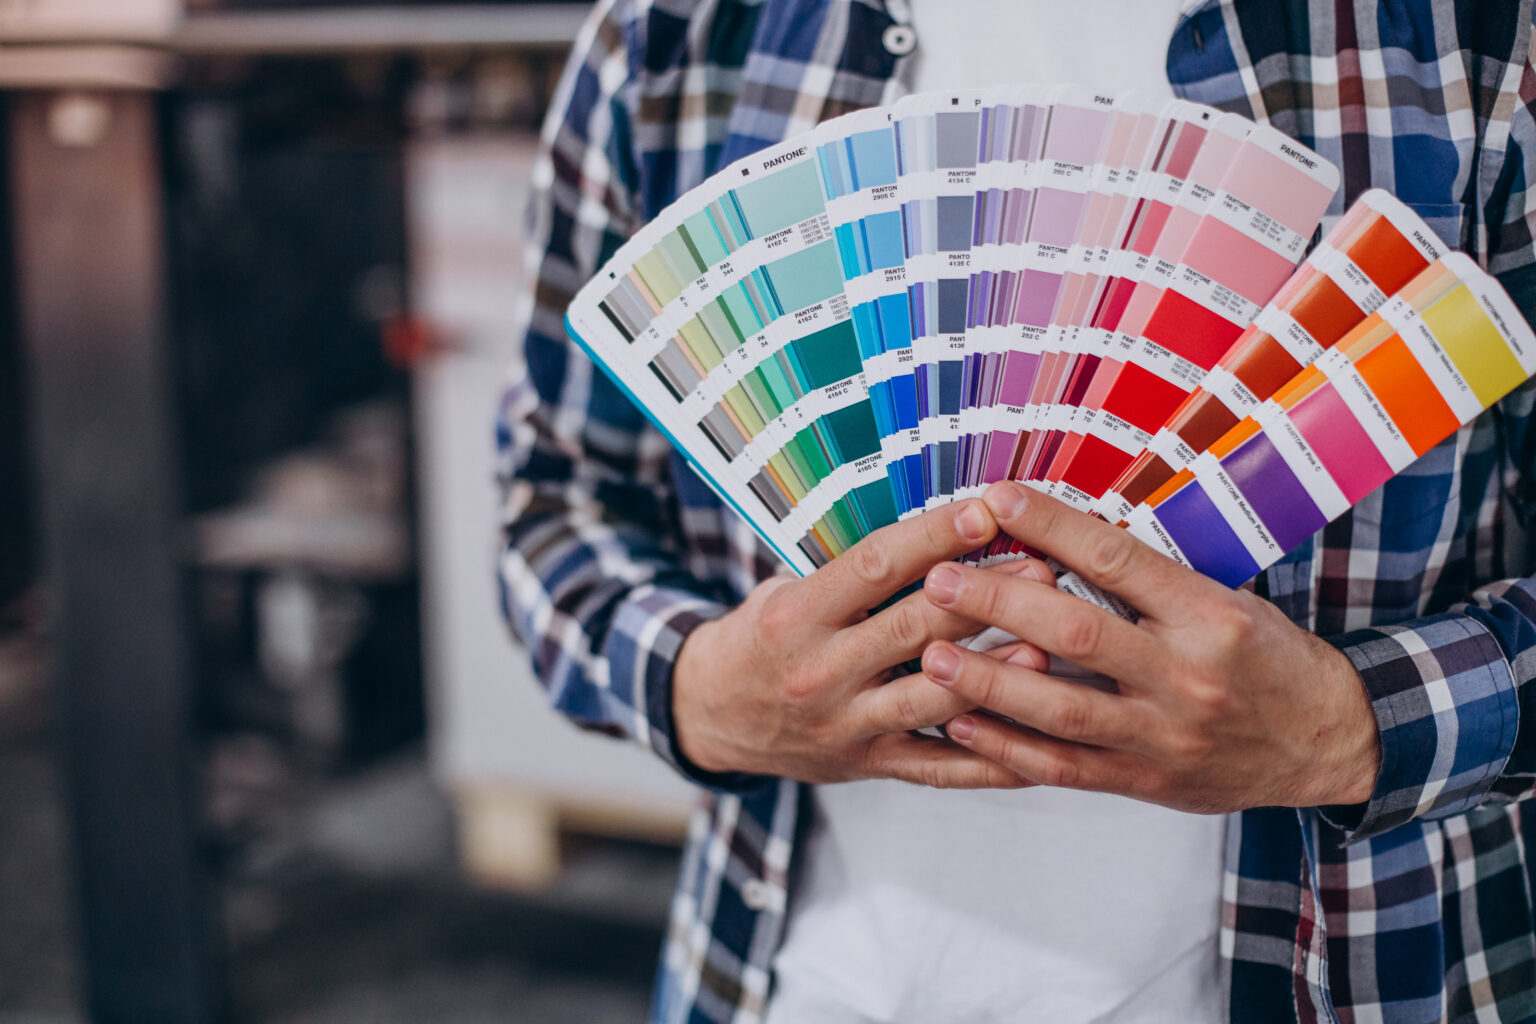 how to spice up your product with colors or without colors color usage in product development